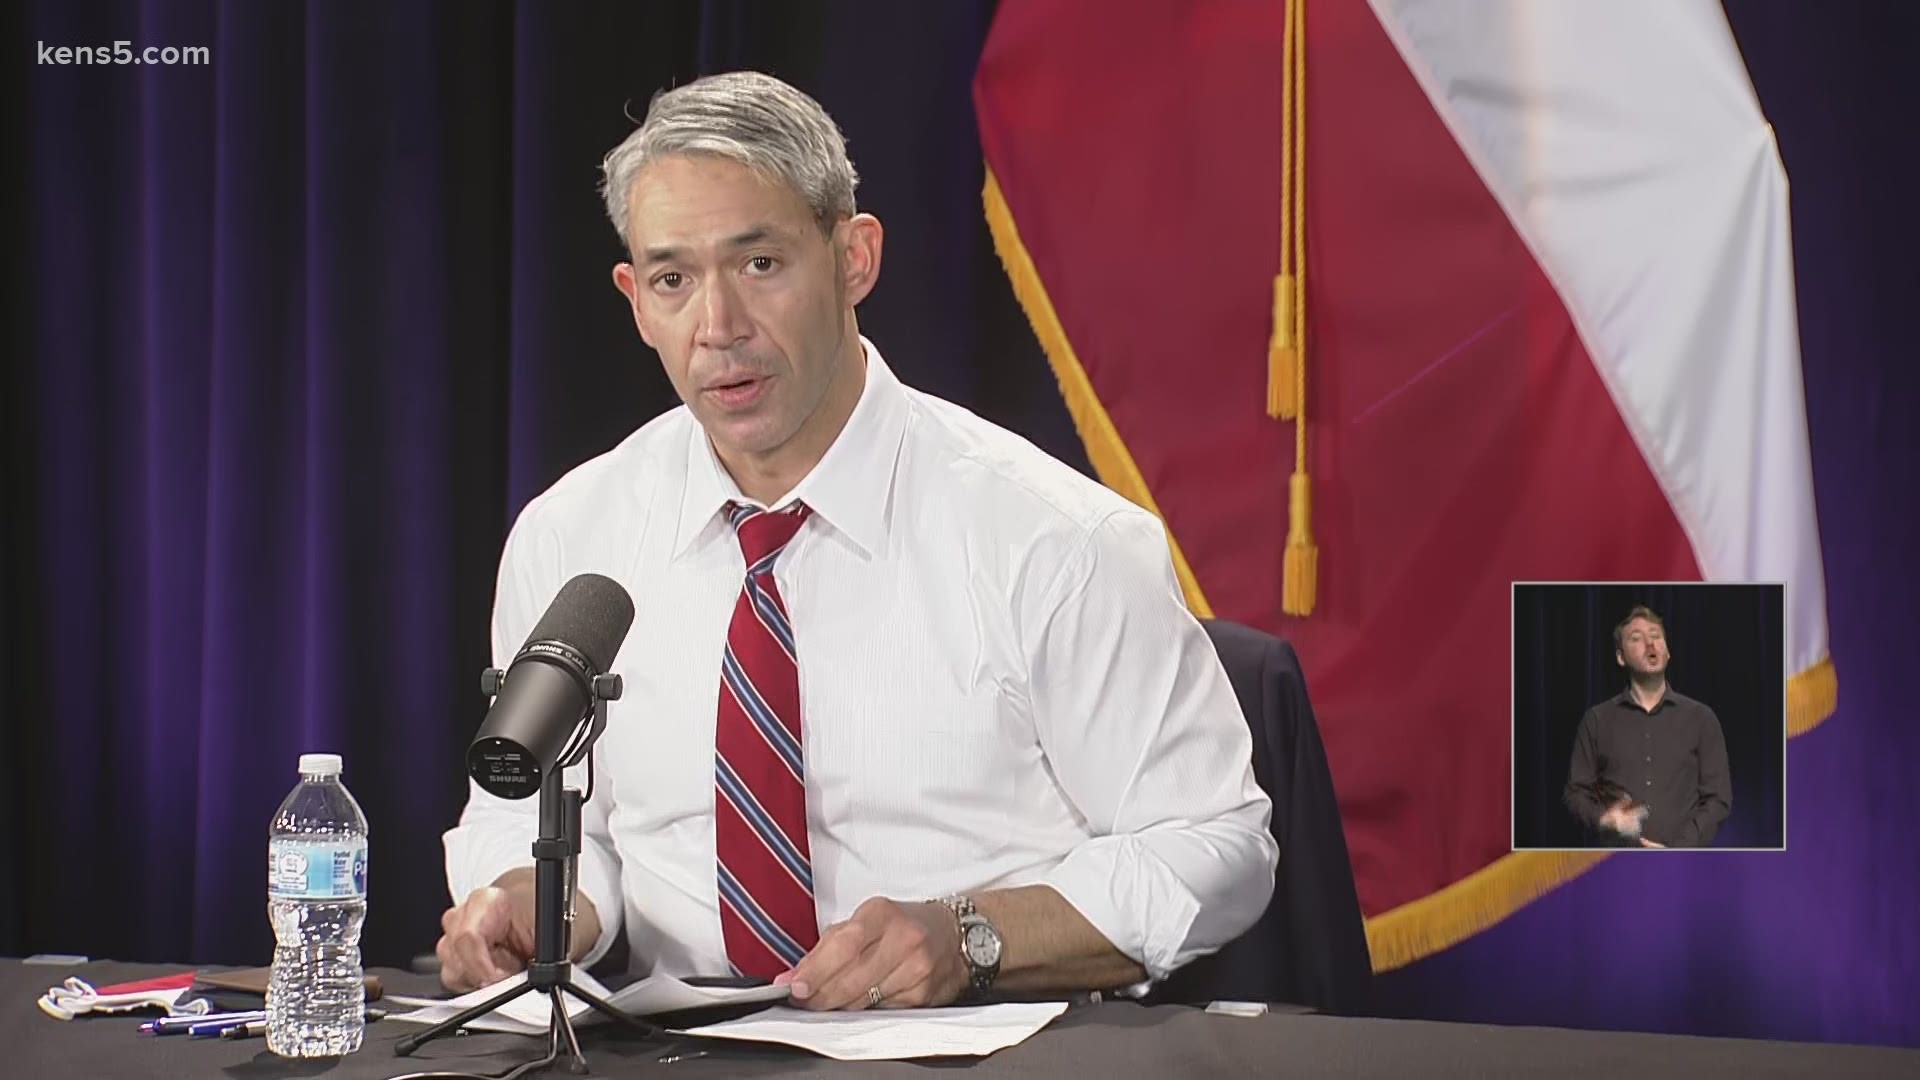 Mayor Nirenberg reported 1,378 additional cases and 1,411 total patients in the hospital. 25 new deaths were also reported, bringing the death toll to 1,685.